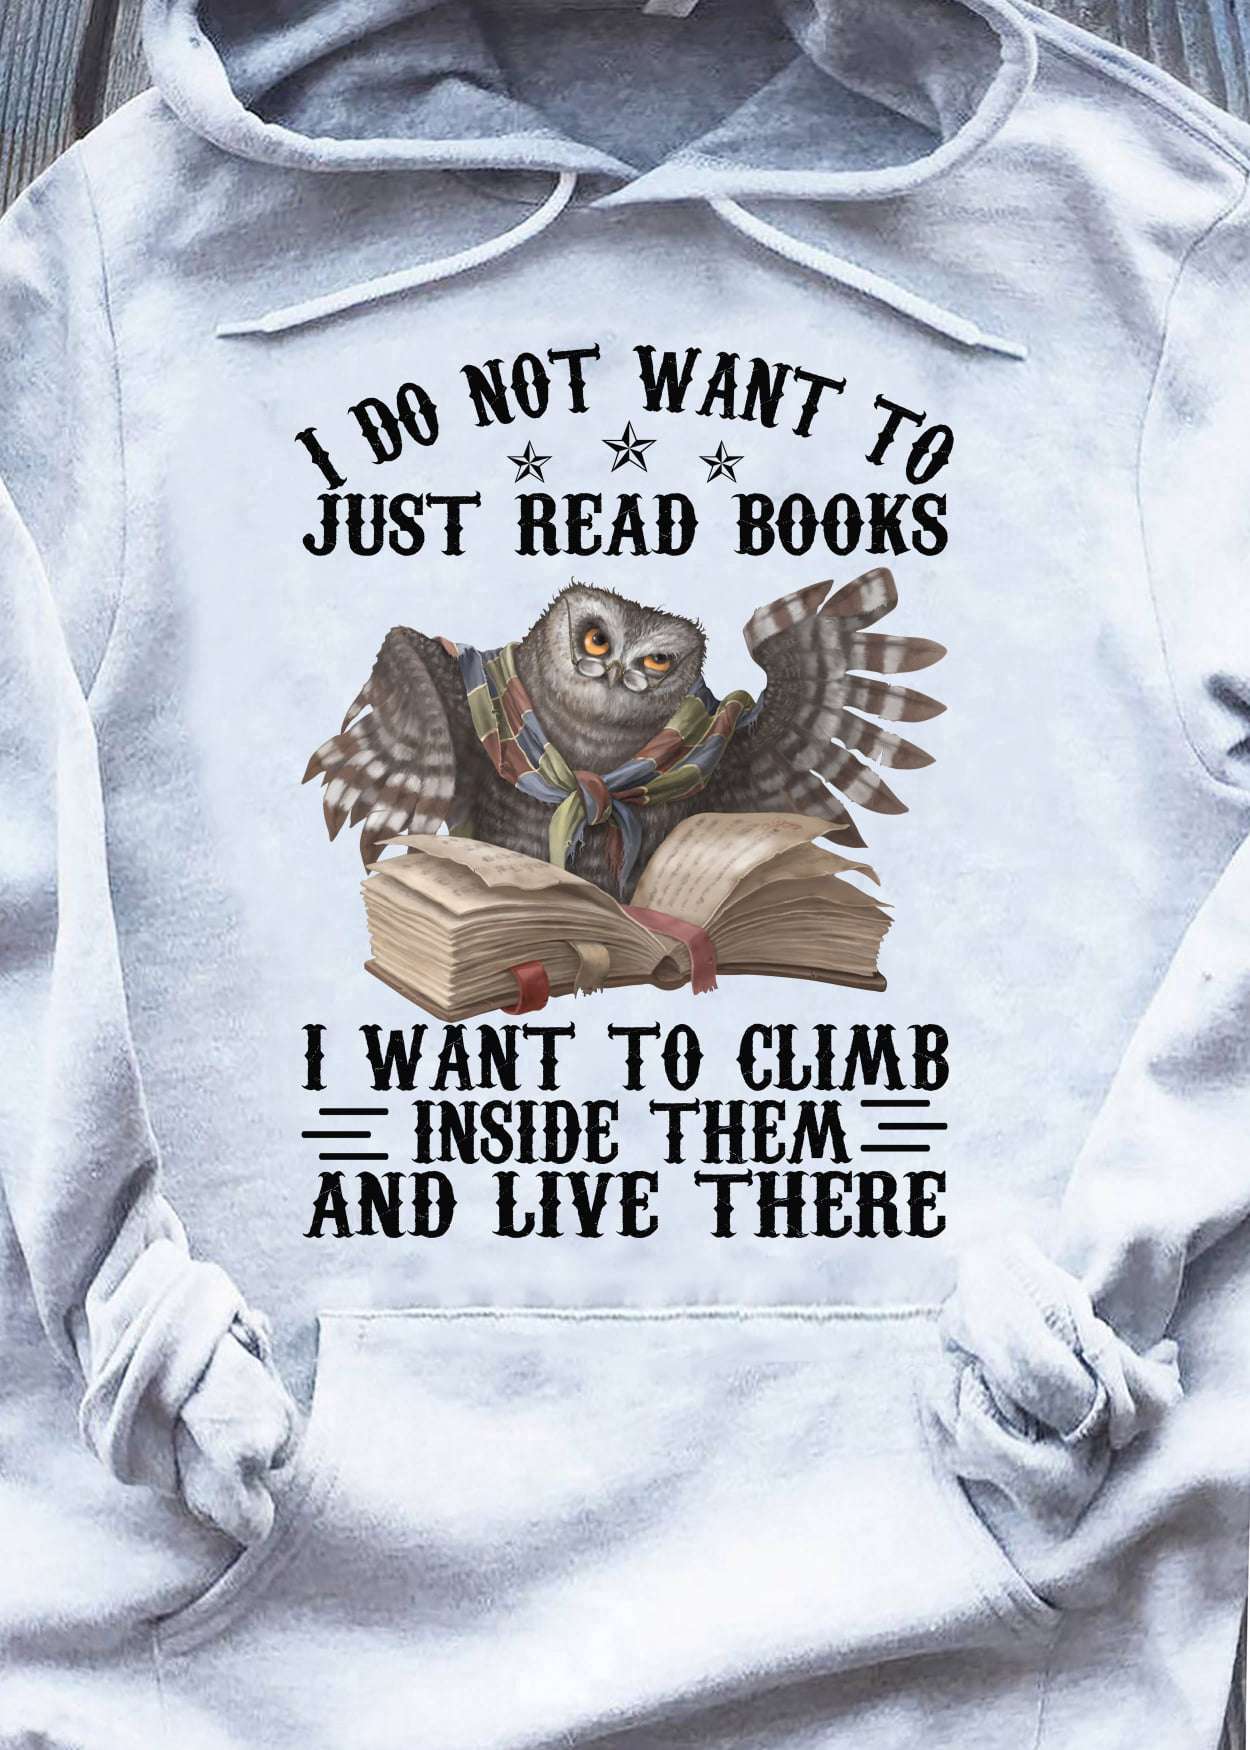 I do not want to just read books I want to climb inside them and live there - Owl reading books